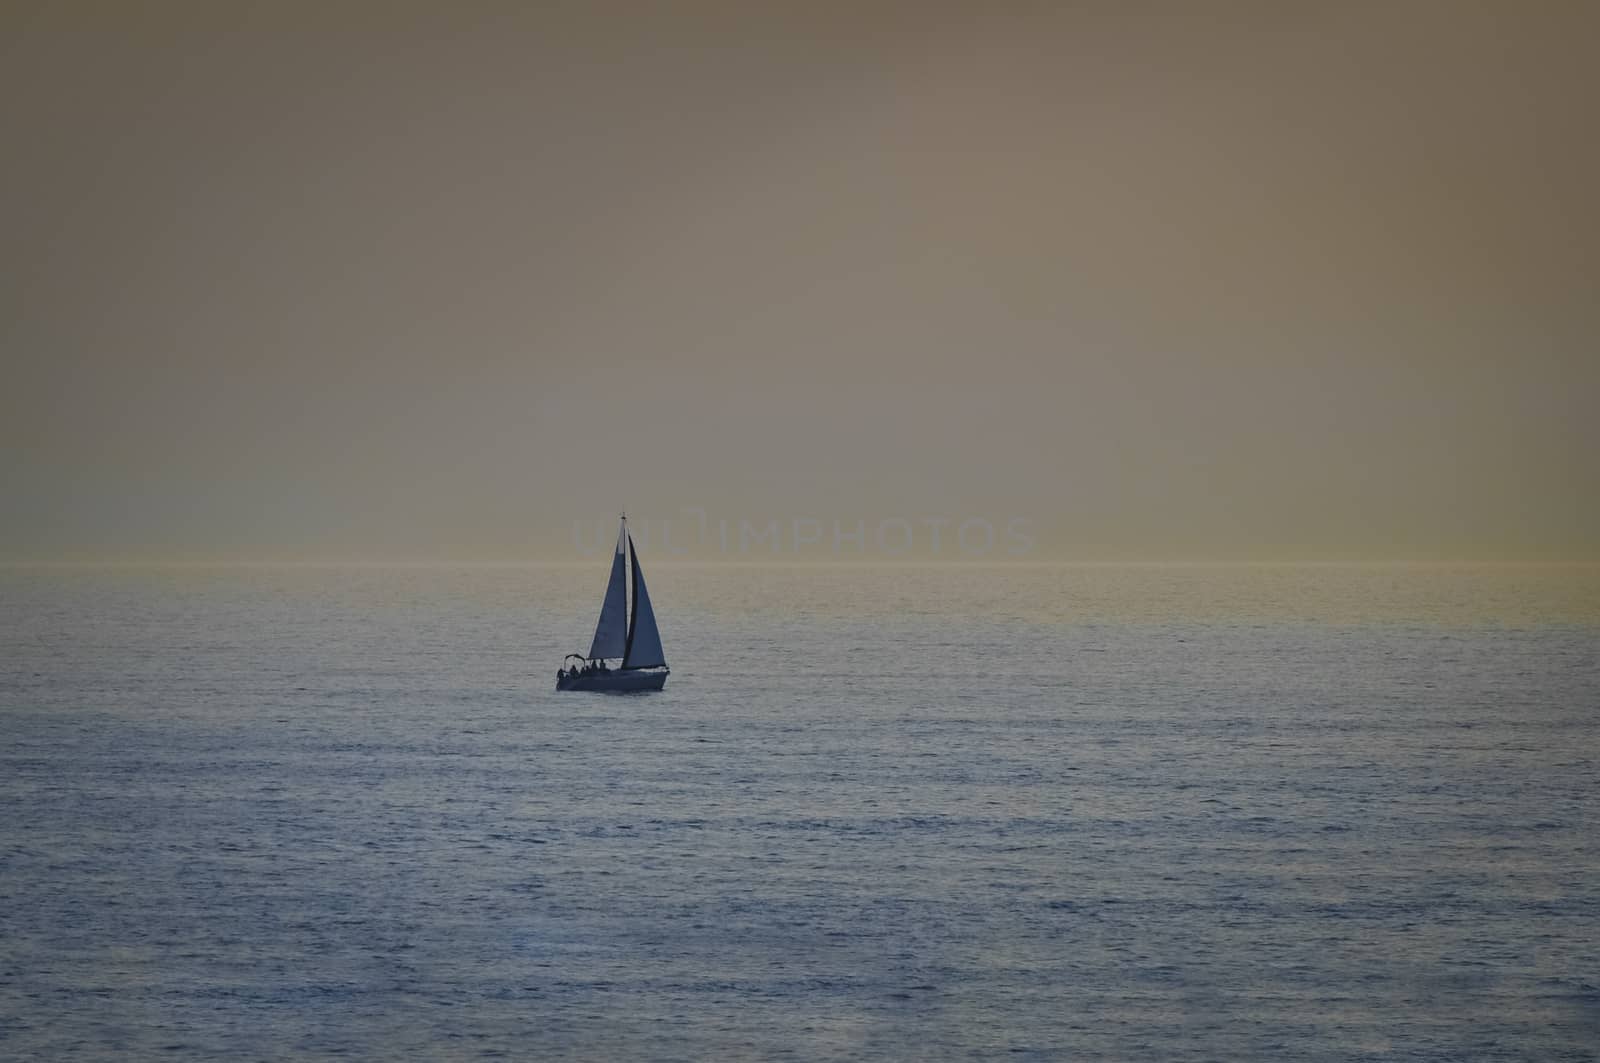 Sail boat in open sea at sunset by asafaric